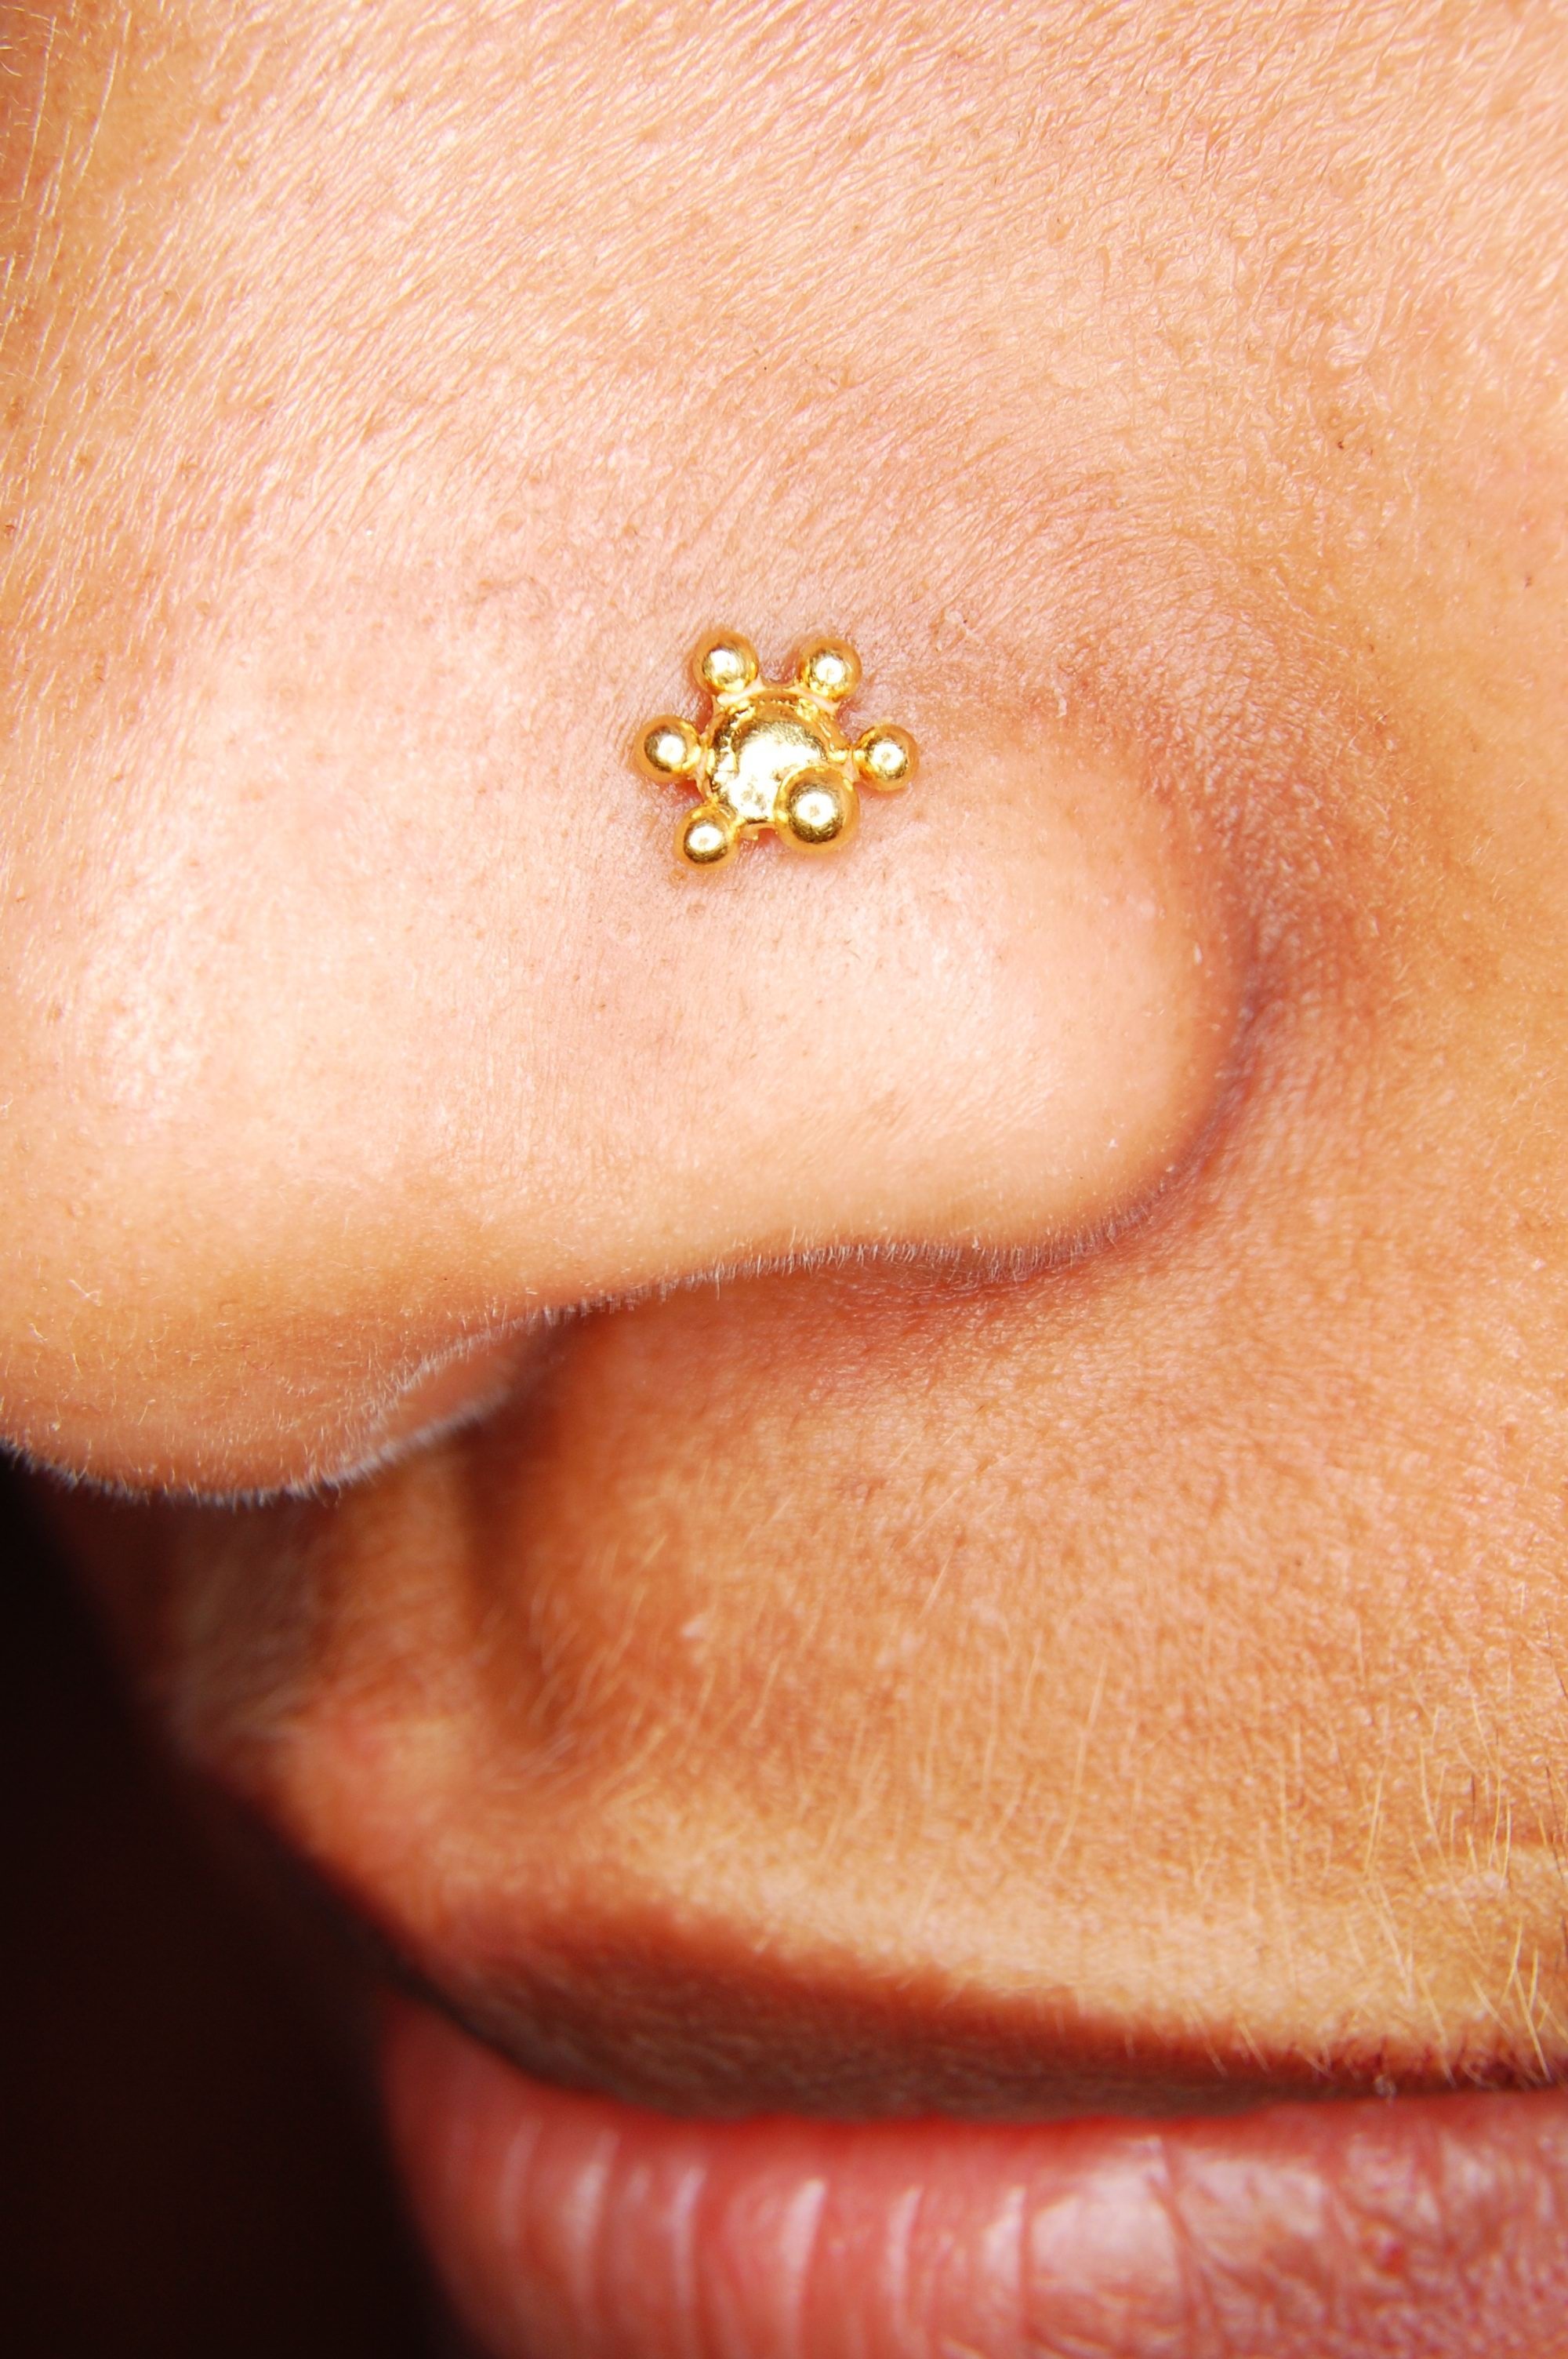 Nose piercing. Image credit: Wikimedia Commons